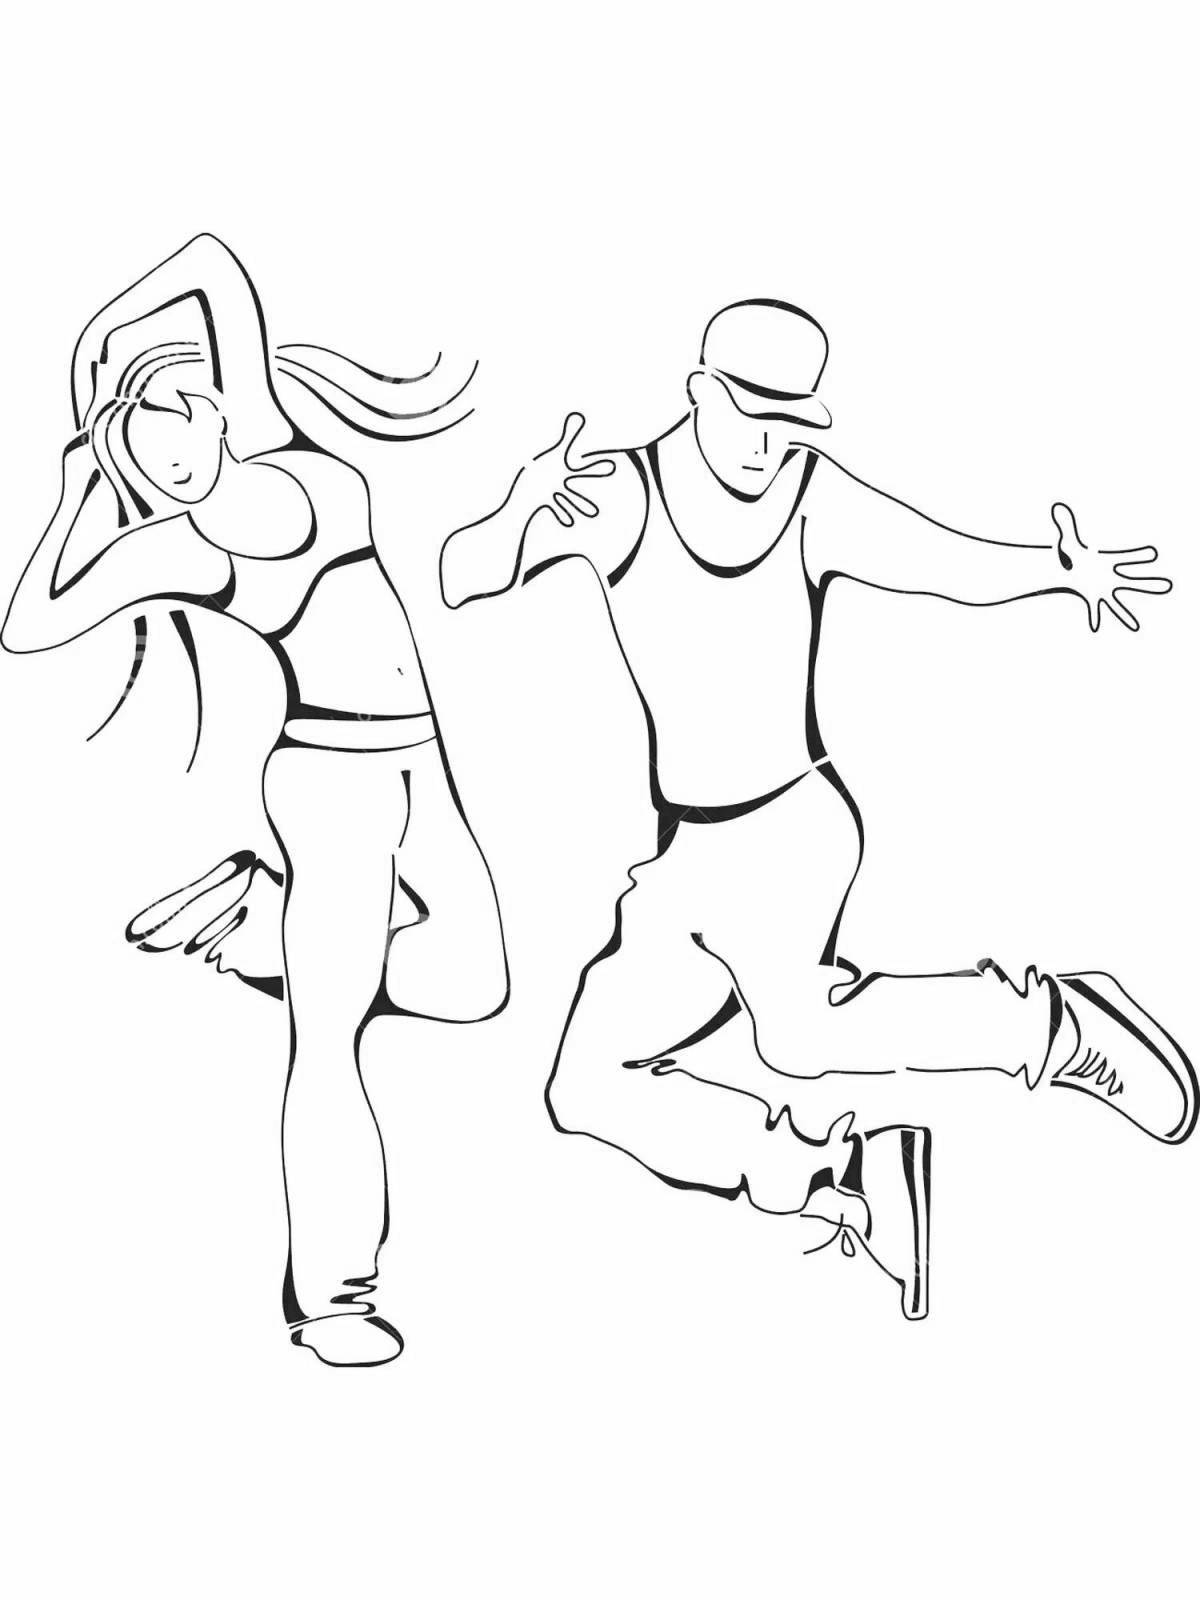 Charming dancer coloring book